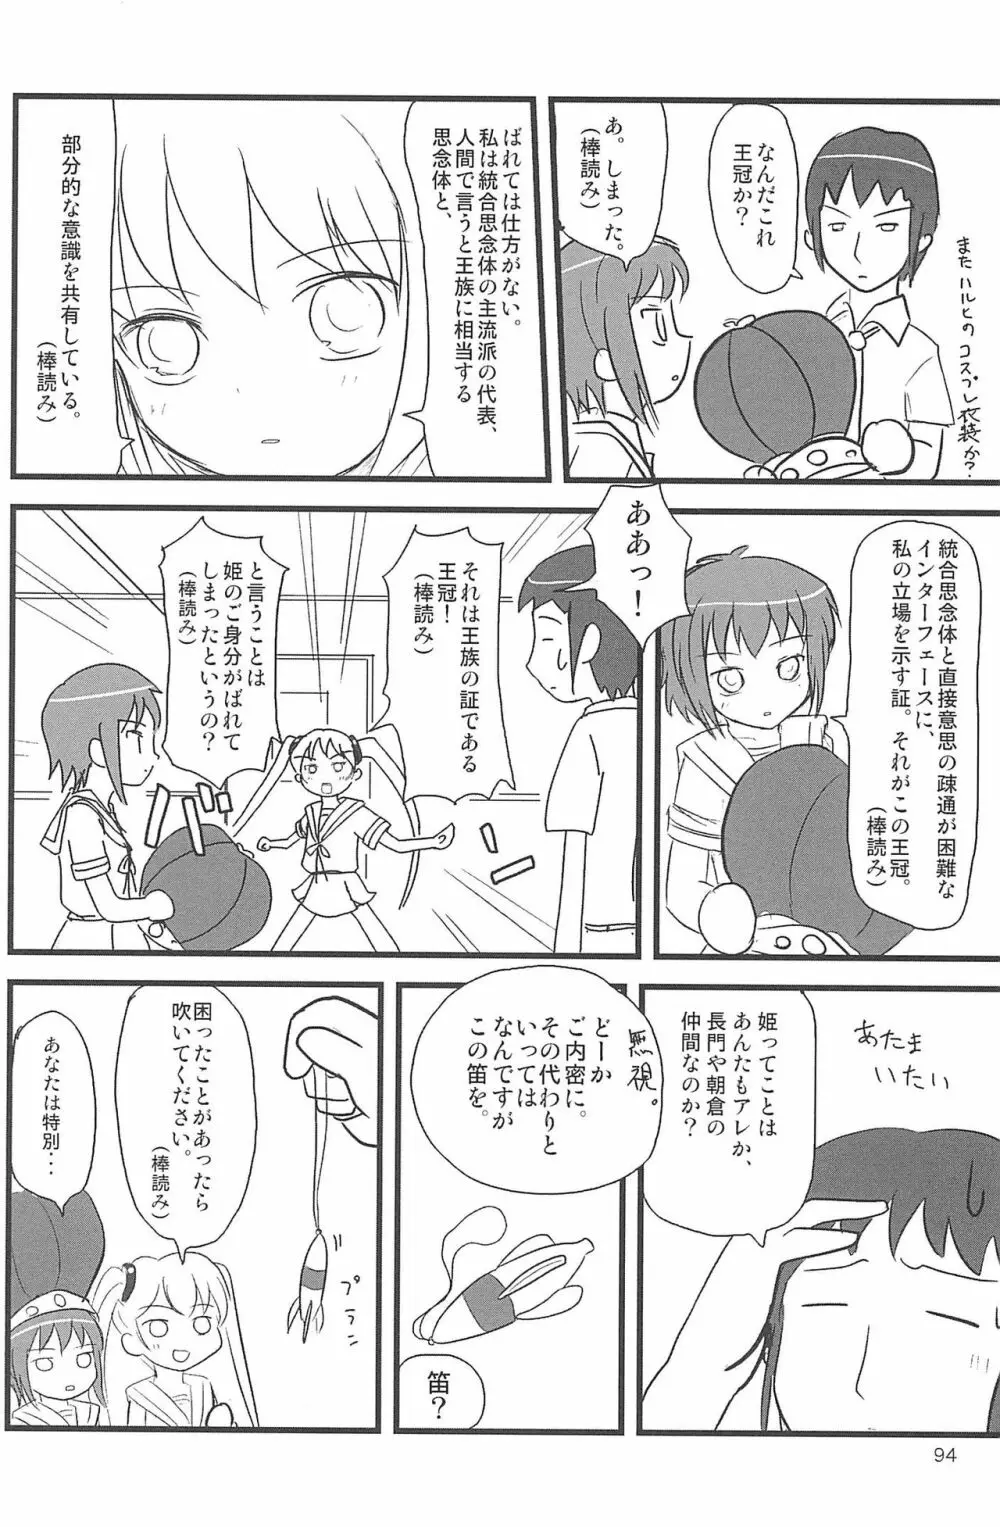 ND-special Volume 5 94ページ